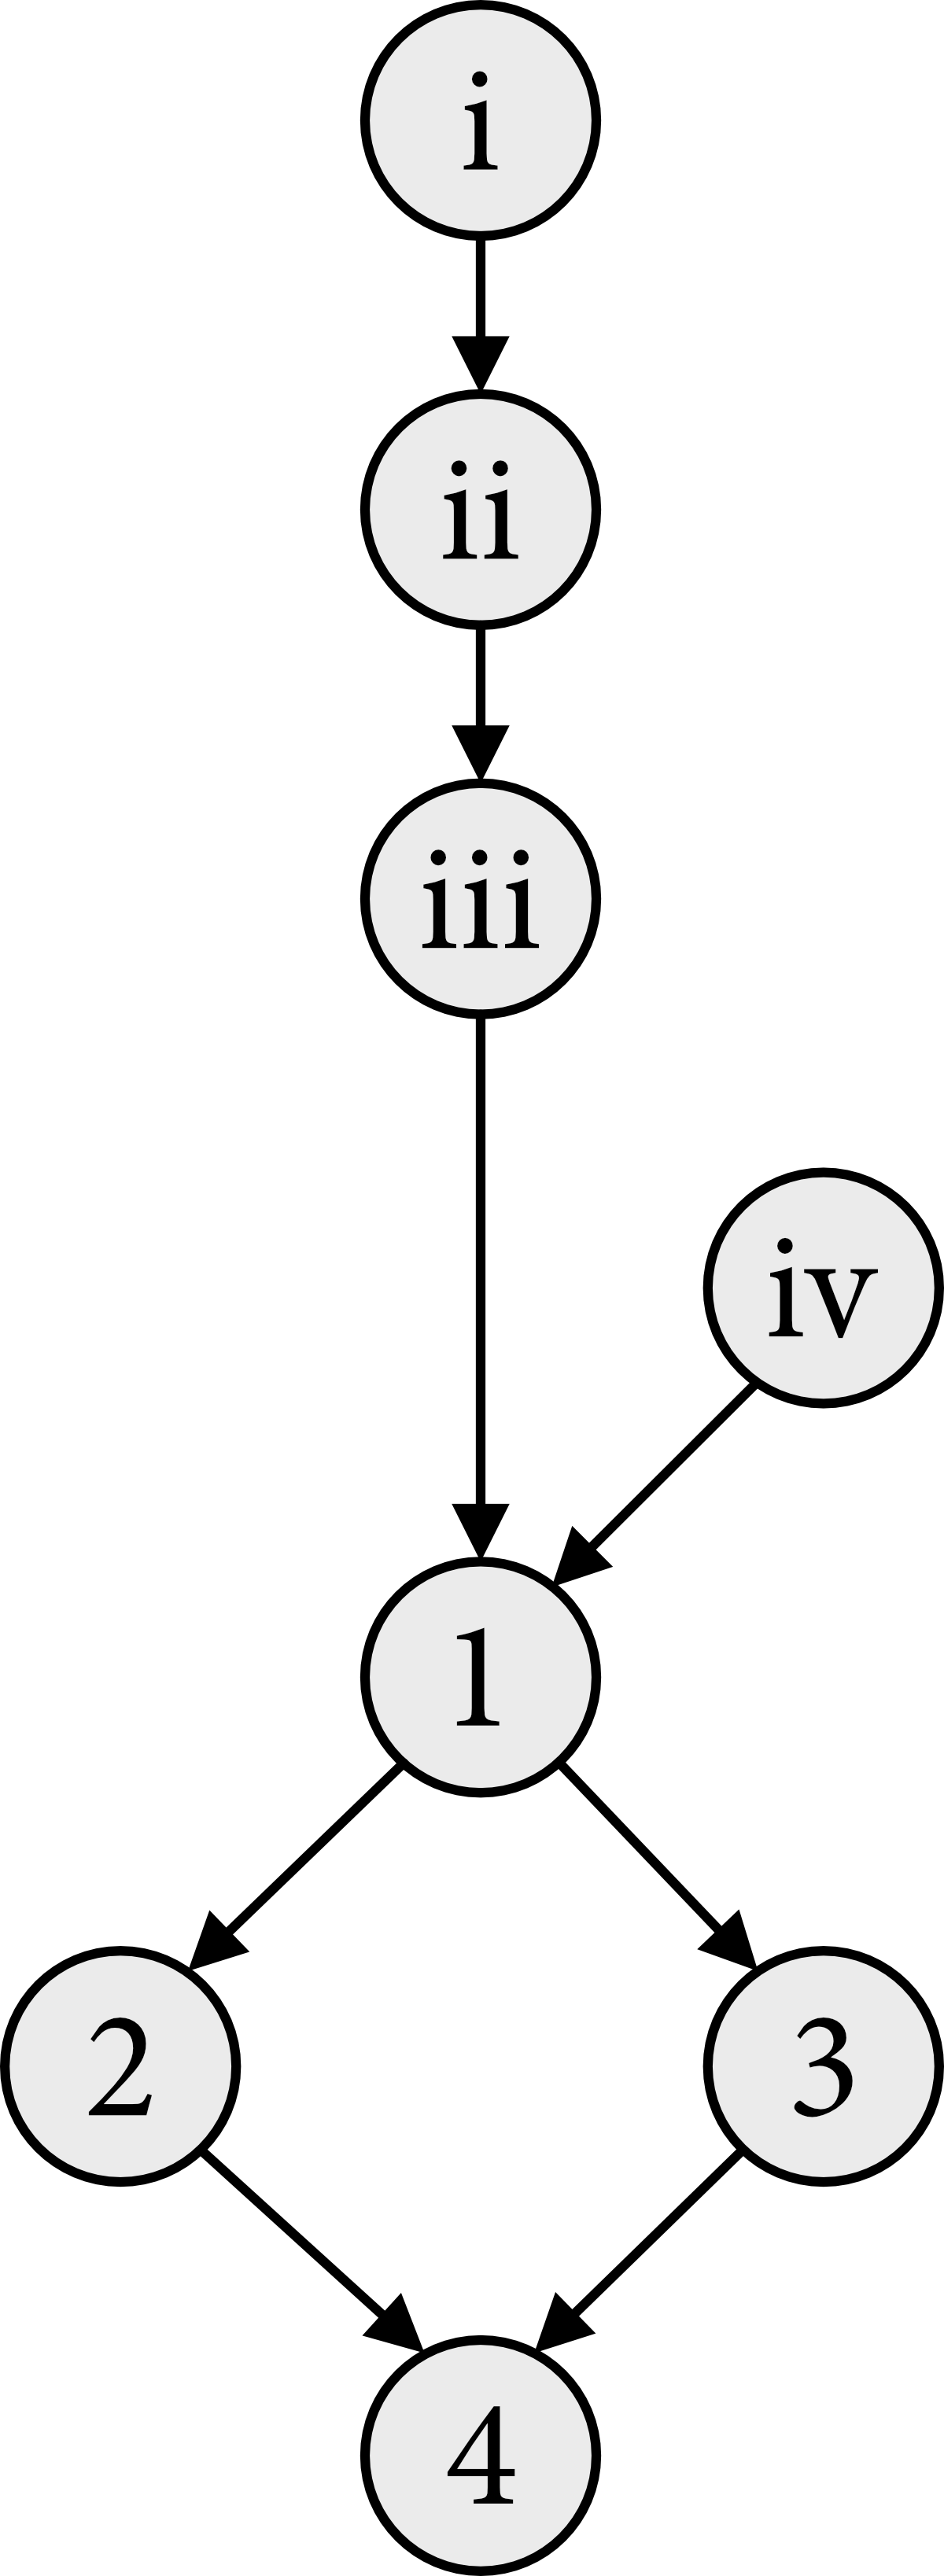 The Exander Project roadmap shows the order of expected publication and dependencies between the eight books in the series.